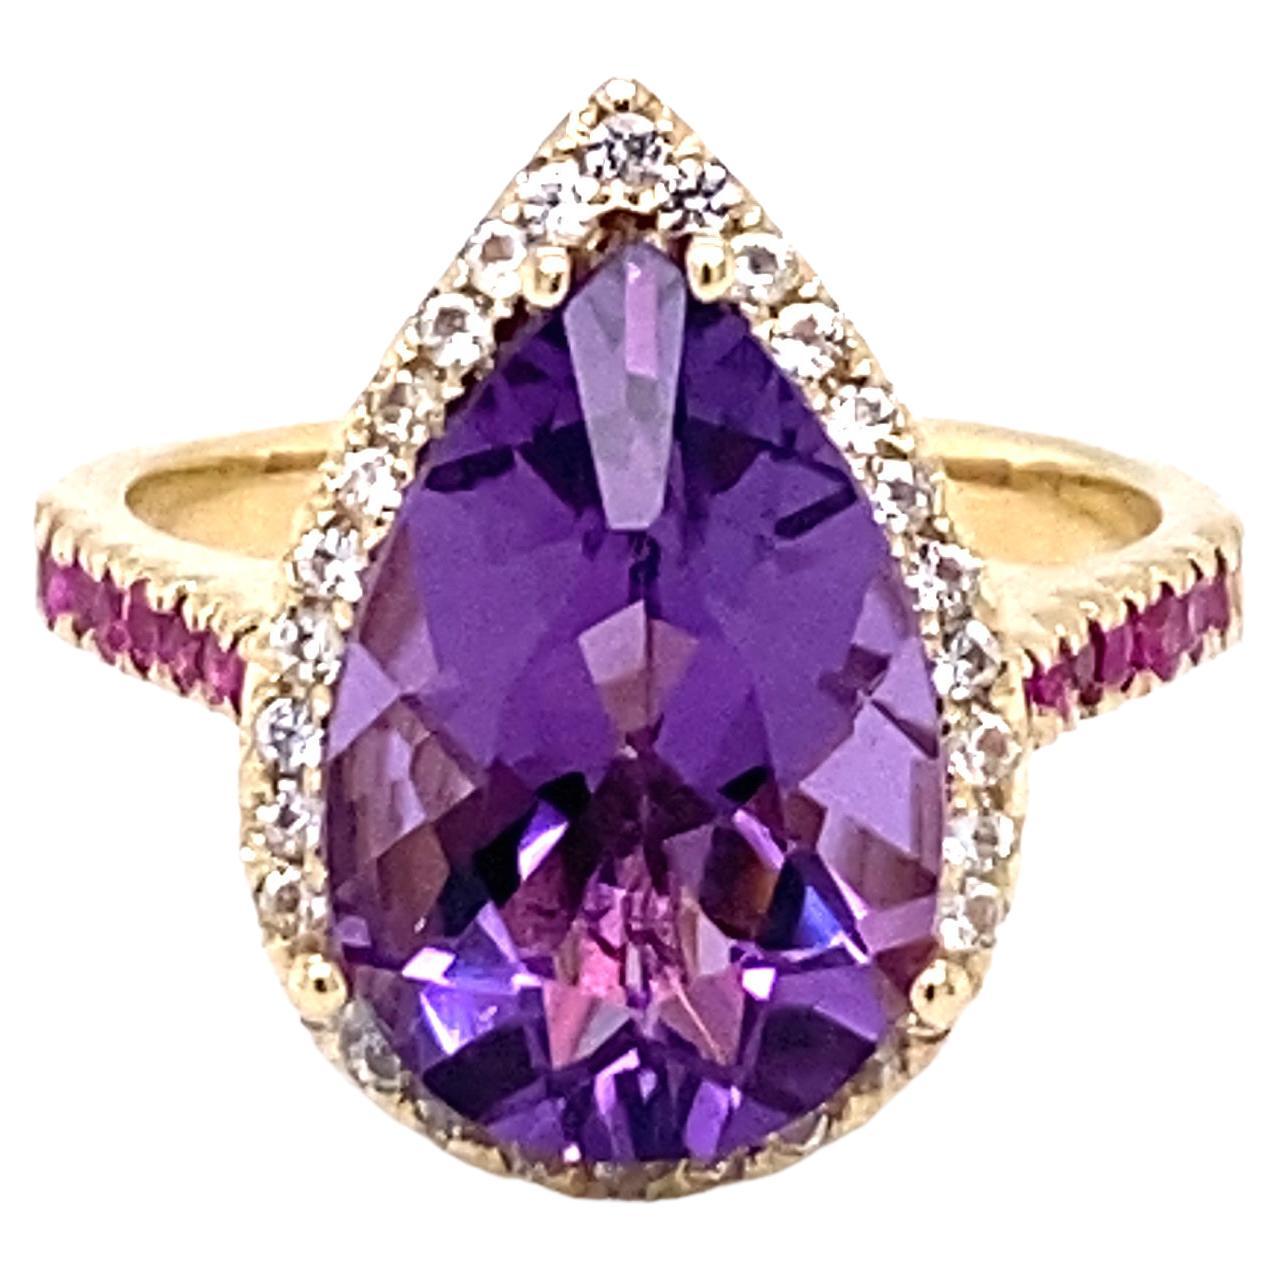 5.18 Carat Amethyst Pink Sapphire White Sapphire 14K Yellow Gold Cocktail Ring